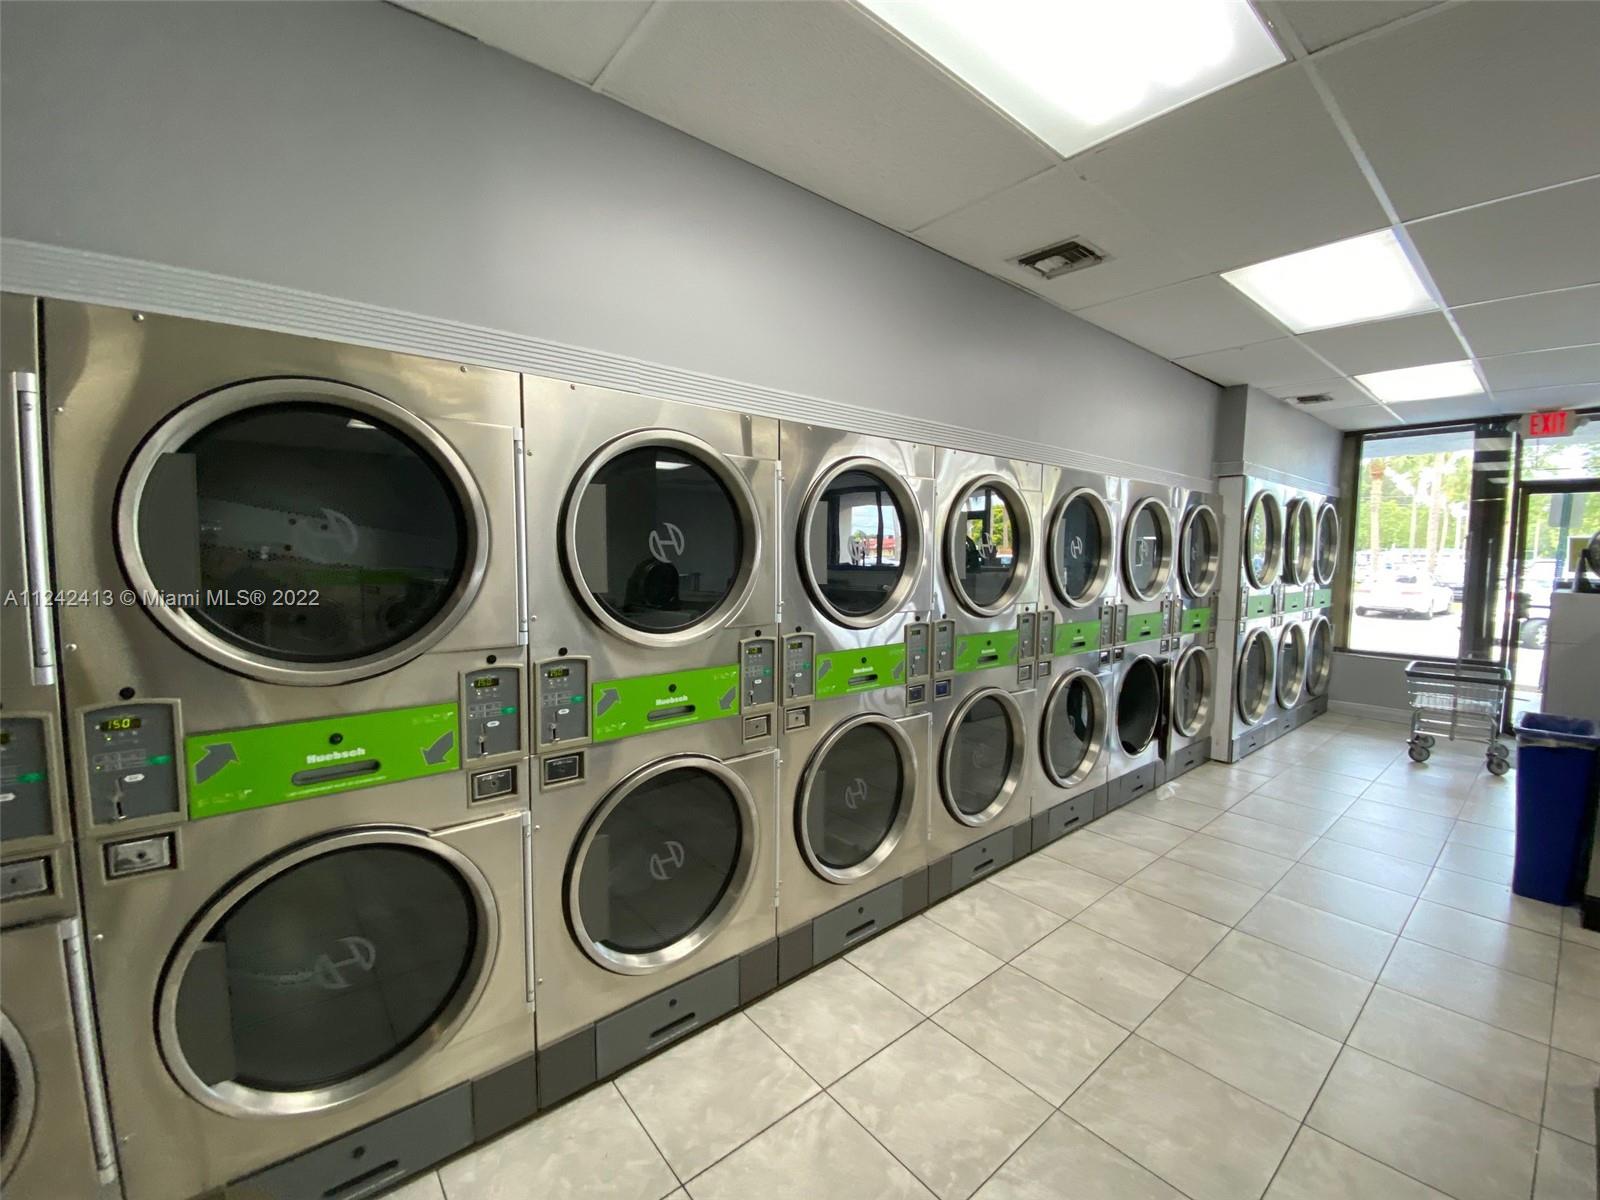 Professionally managed Coin laundry business in a very busy shopping center with very nice restaurants and supermarket that brings in many customers for the very cleaned with new coin laundry equipment and air-condition This business is for family that wants to an easy business for the family.  The business offers Fold and wash.

Bring your best offers.